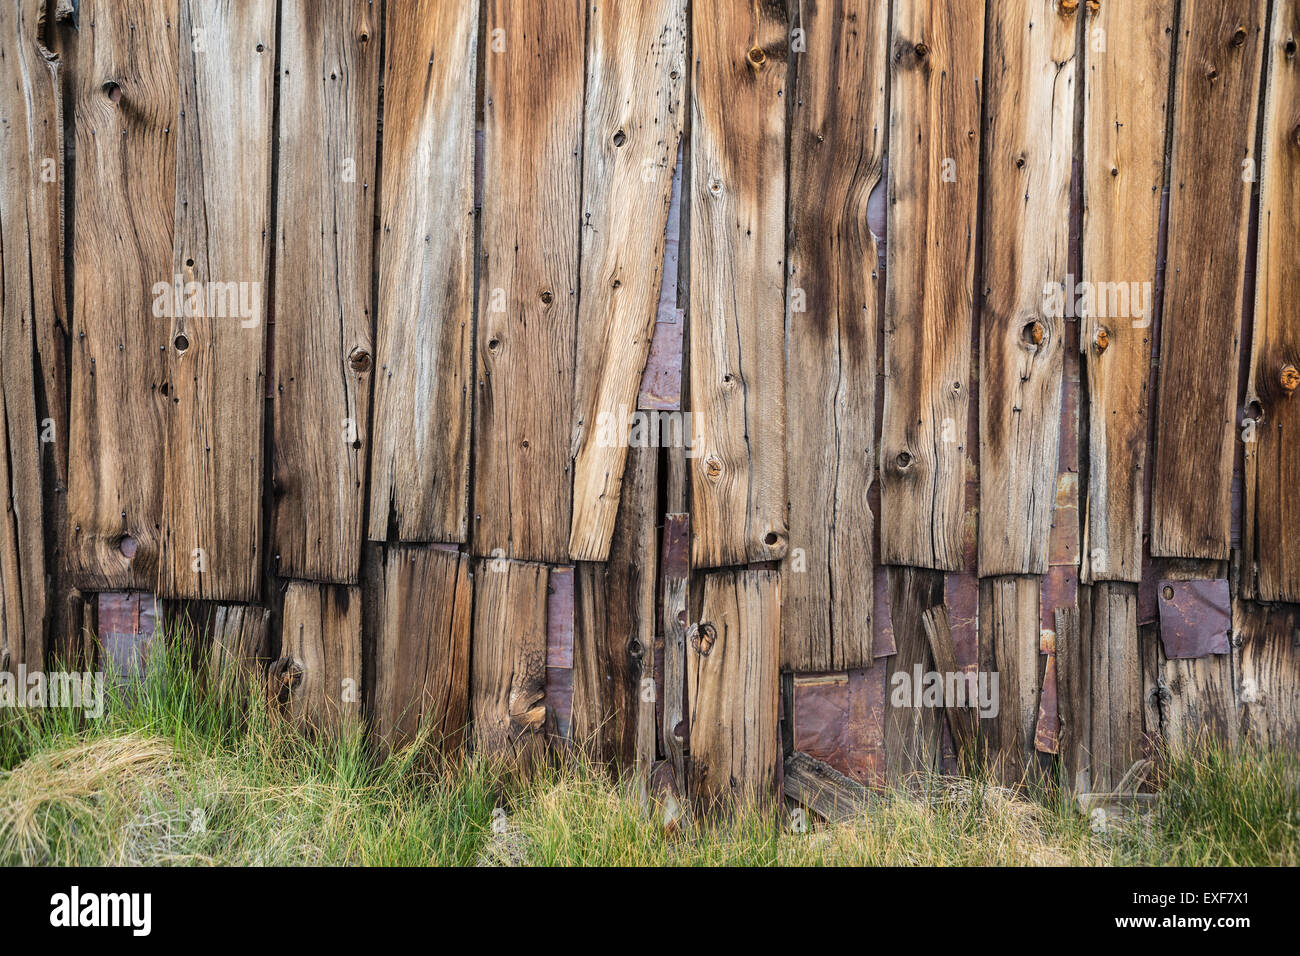 Funky old wood wall at Bodie ghost town in California's Sierra Nevada mountains. Stock Photo